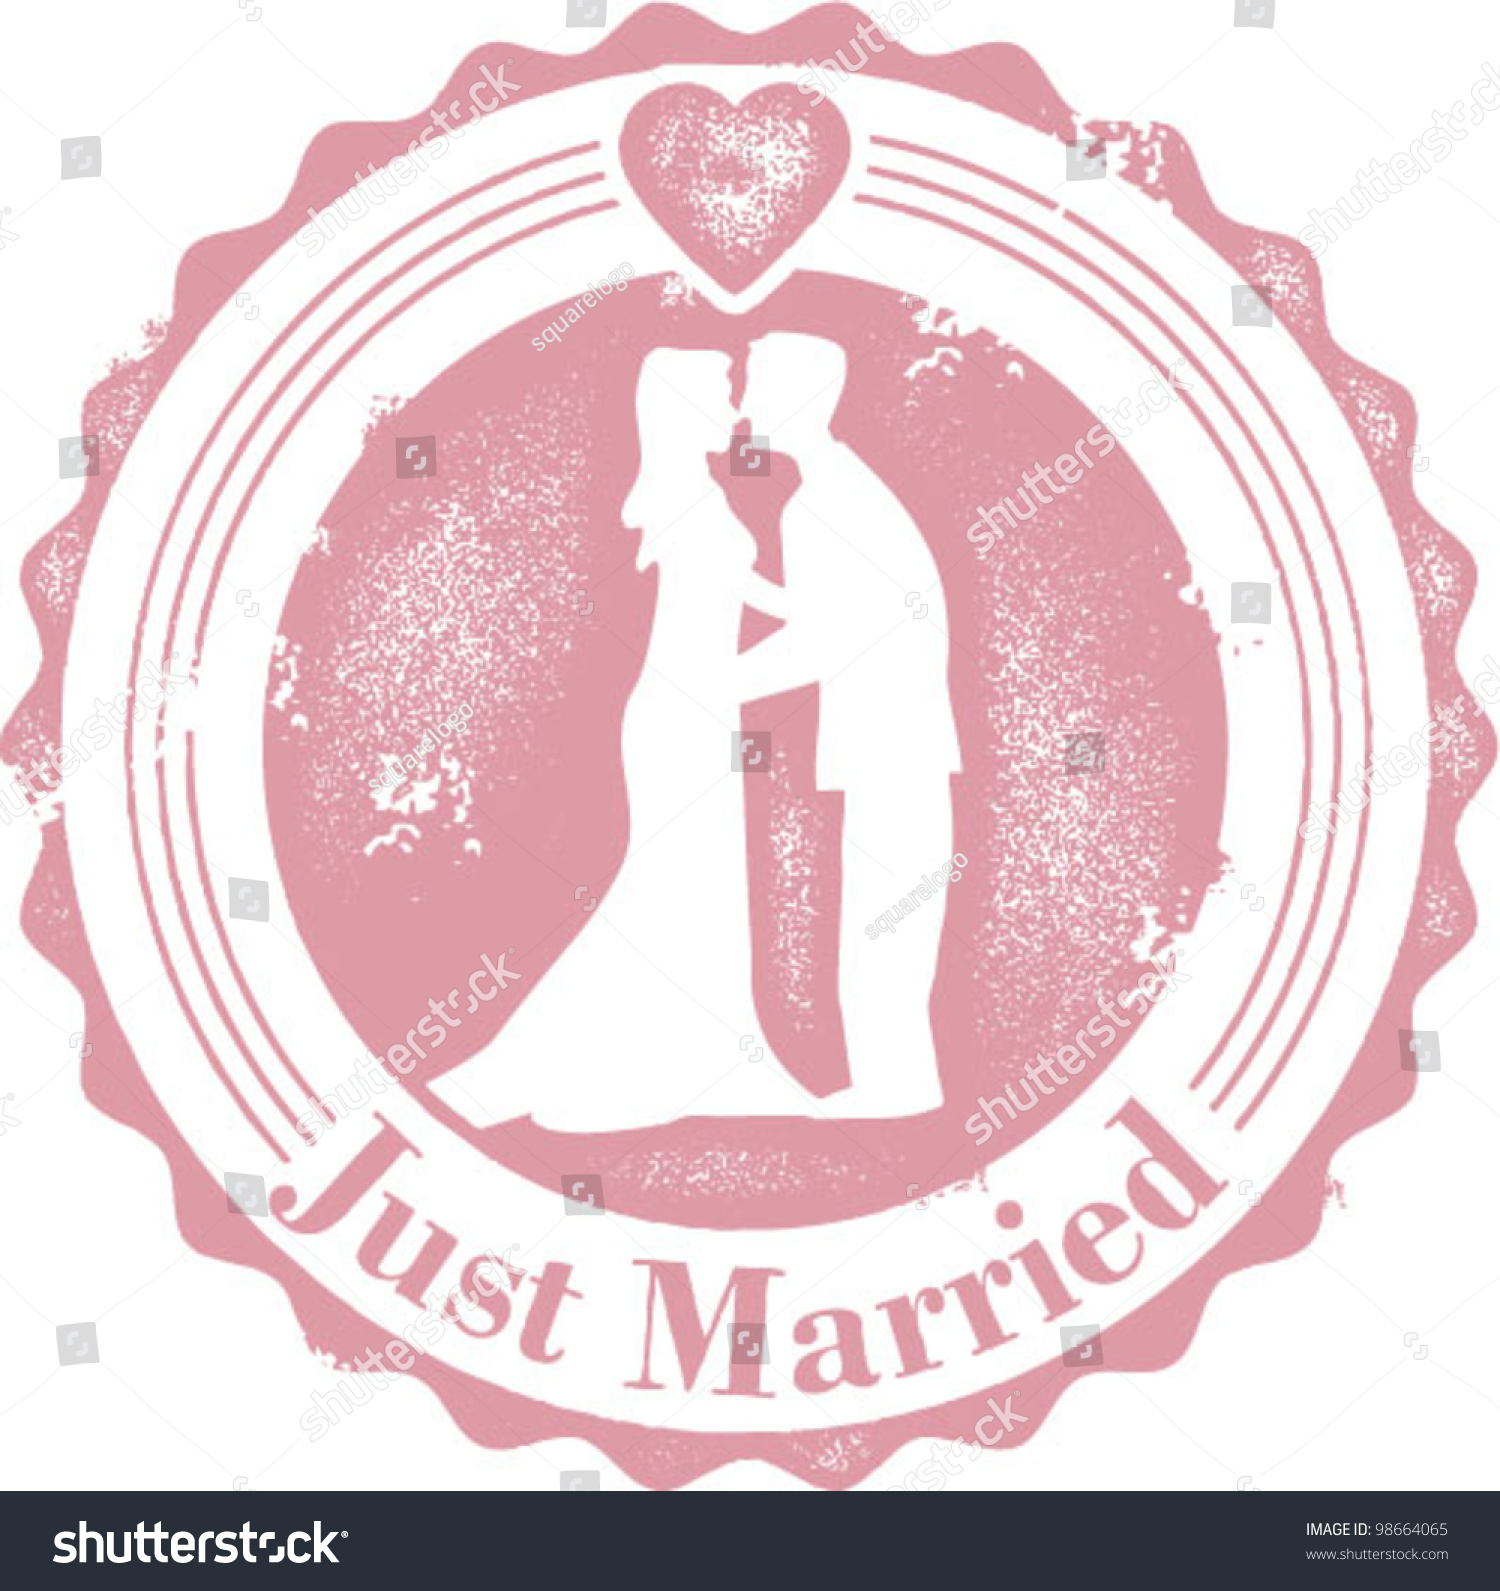 Just Married Wedding Couple Stamp Royalty Free Stock Image